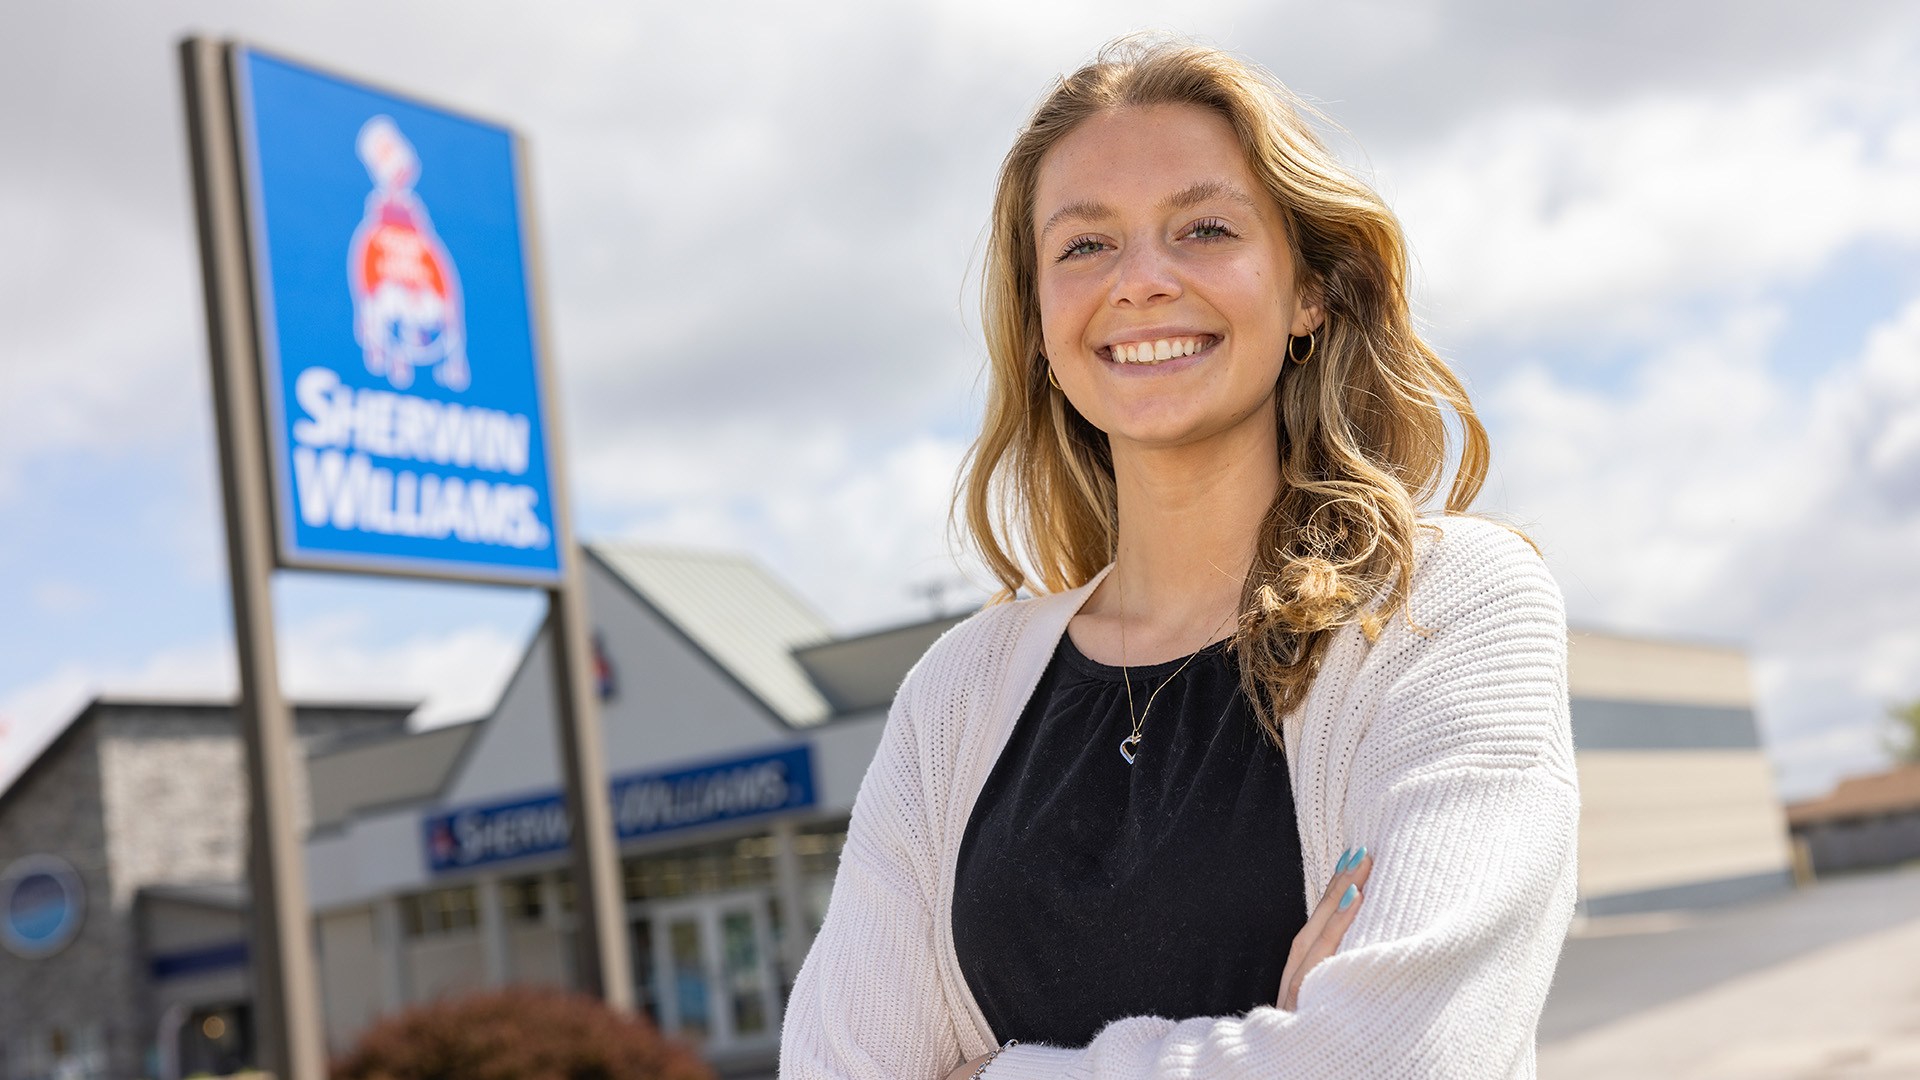 A person stands in front of a Sherwin-Williams sign.